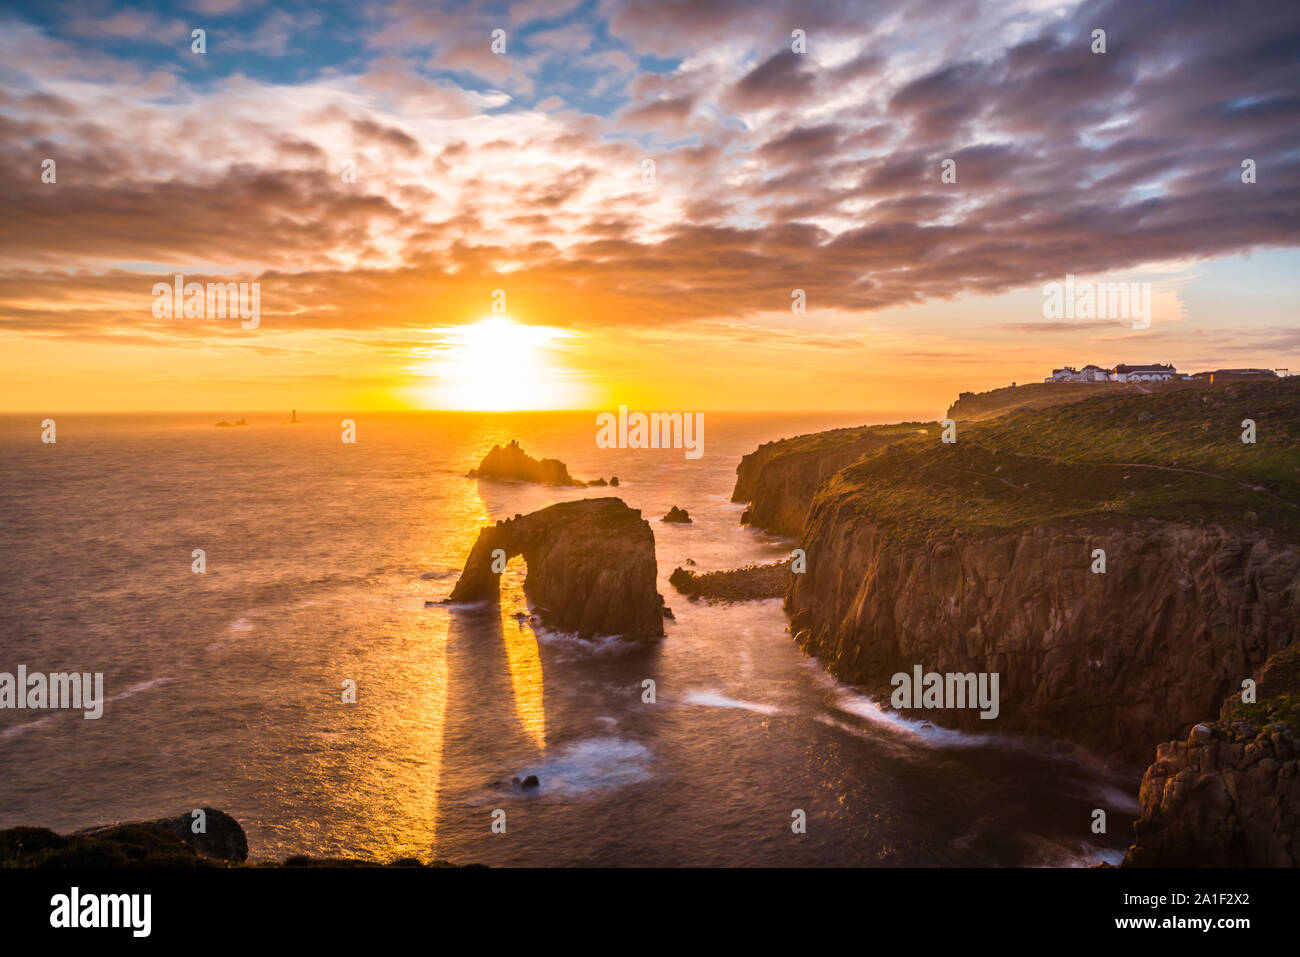 Dramatic sky at sunset with Enys Dodnan and the Armed Knight rock formations at Lands End, Cornwall, England, United Kingdom, Europe. Stock Photo